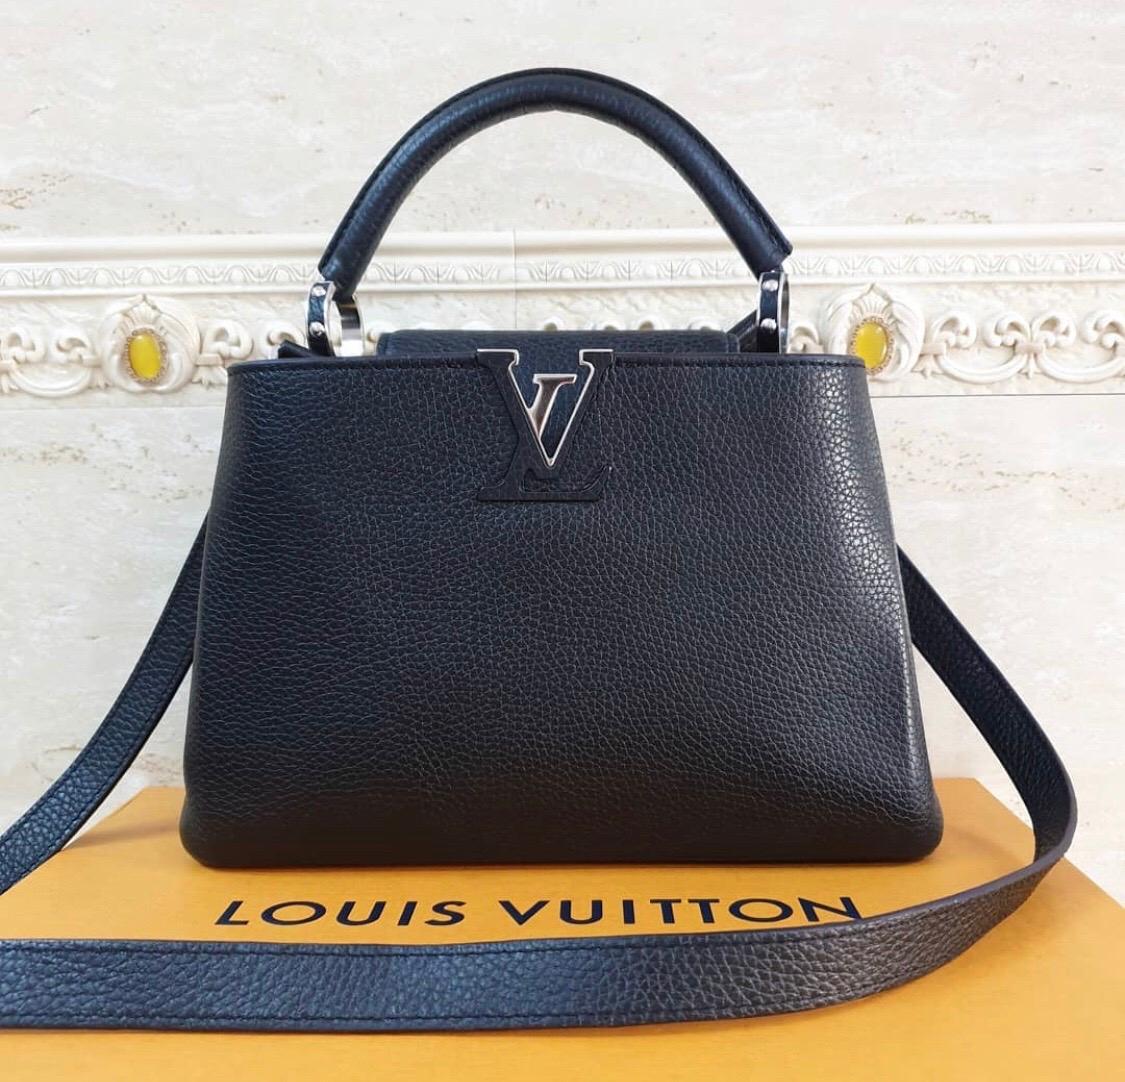 Louis Vuitton Capucines

BB size


    Black
    Taurillon leather
    Siver  hardware
    Double carry style: flap inside or outside
    Compartmented interior with zipped pocket
    4 protective metal bottom studs
    Strap:Removable, adjustable
 